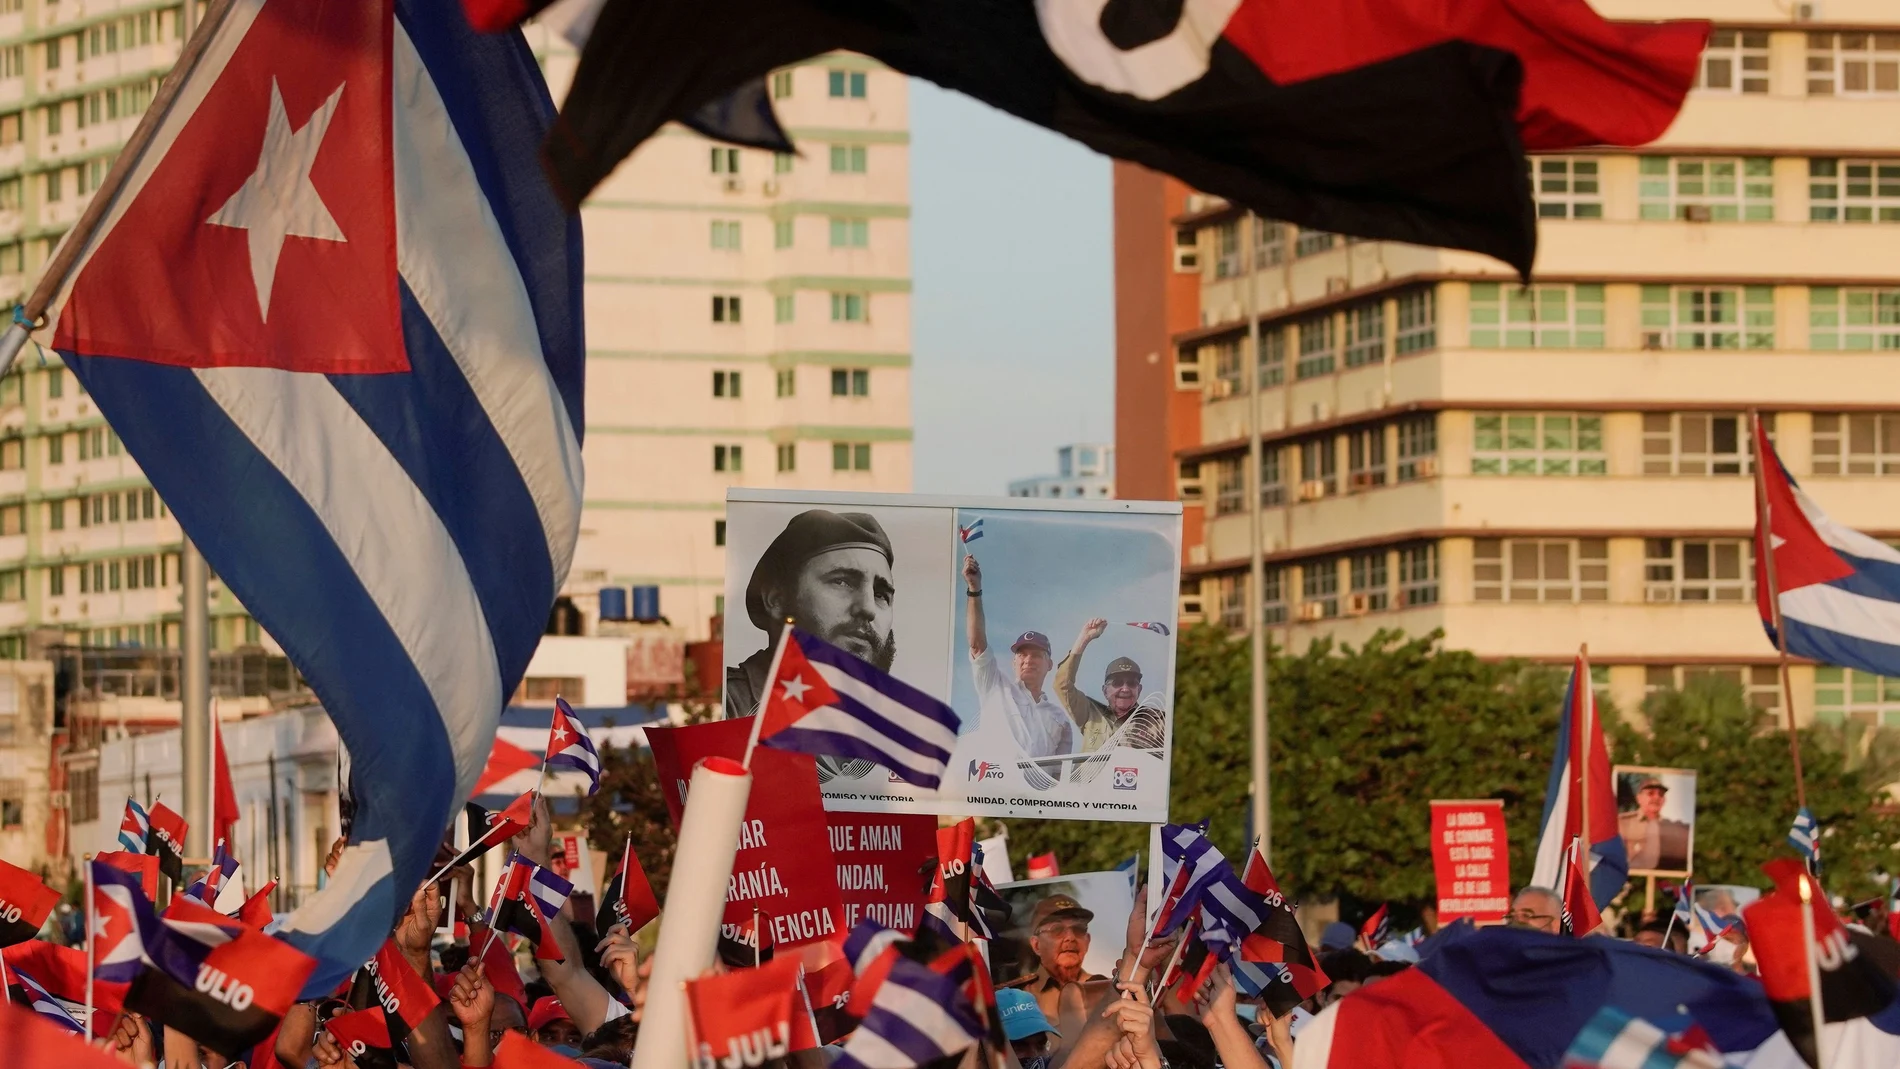 FILE PHOTO: People carry a poster with photographs of Cuba's late President Fidel Castro, Cuba's President and First Secretary of the Communist Party Miguel Diaz-Canel and Cuba's former President and First Secretary of the Communist Party Raul Castro during a rally in Havana, Cuba, July 17, 2021. REUTERS/Alexandre Meneghini/File Photo